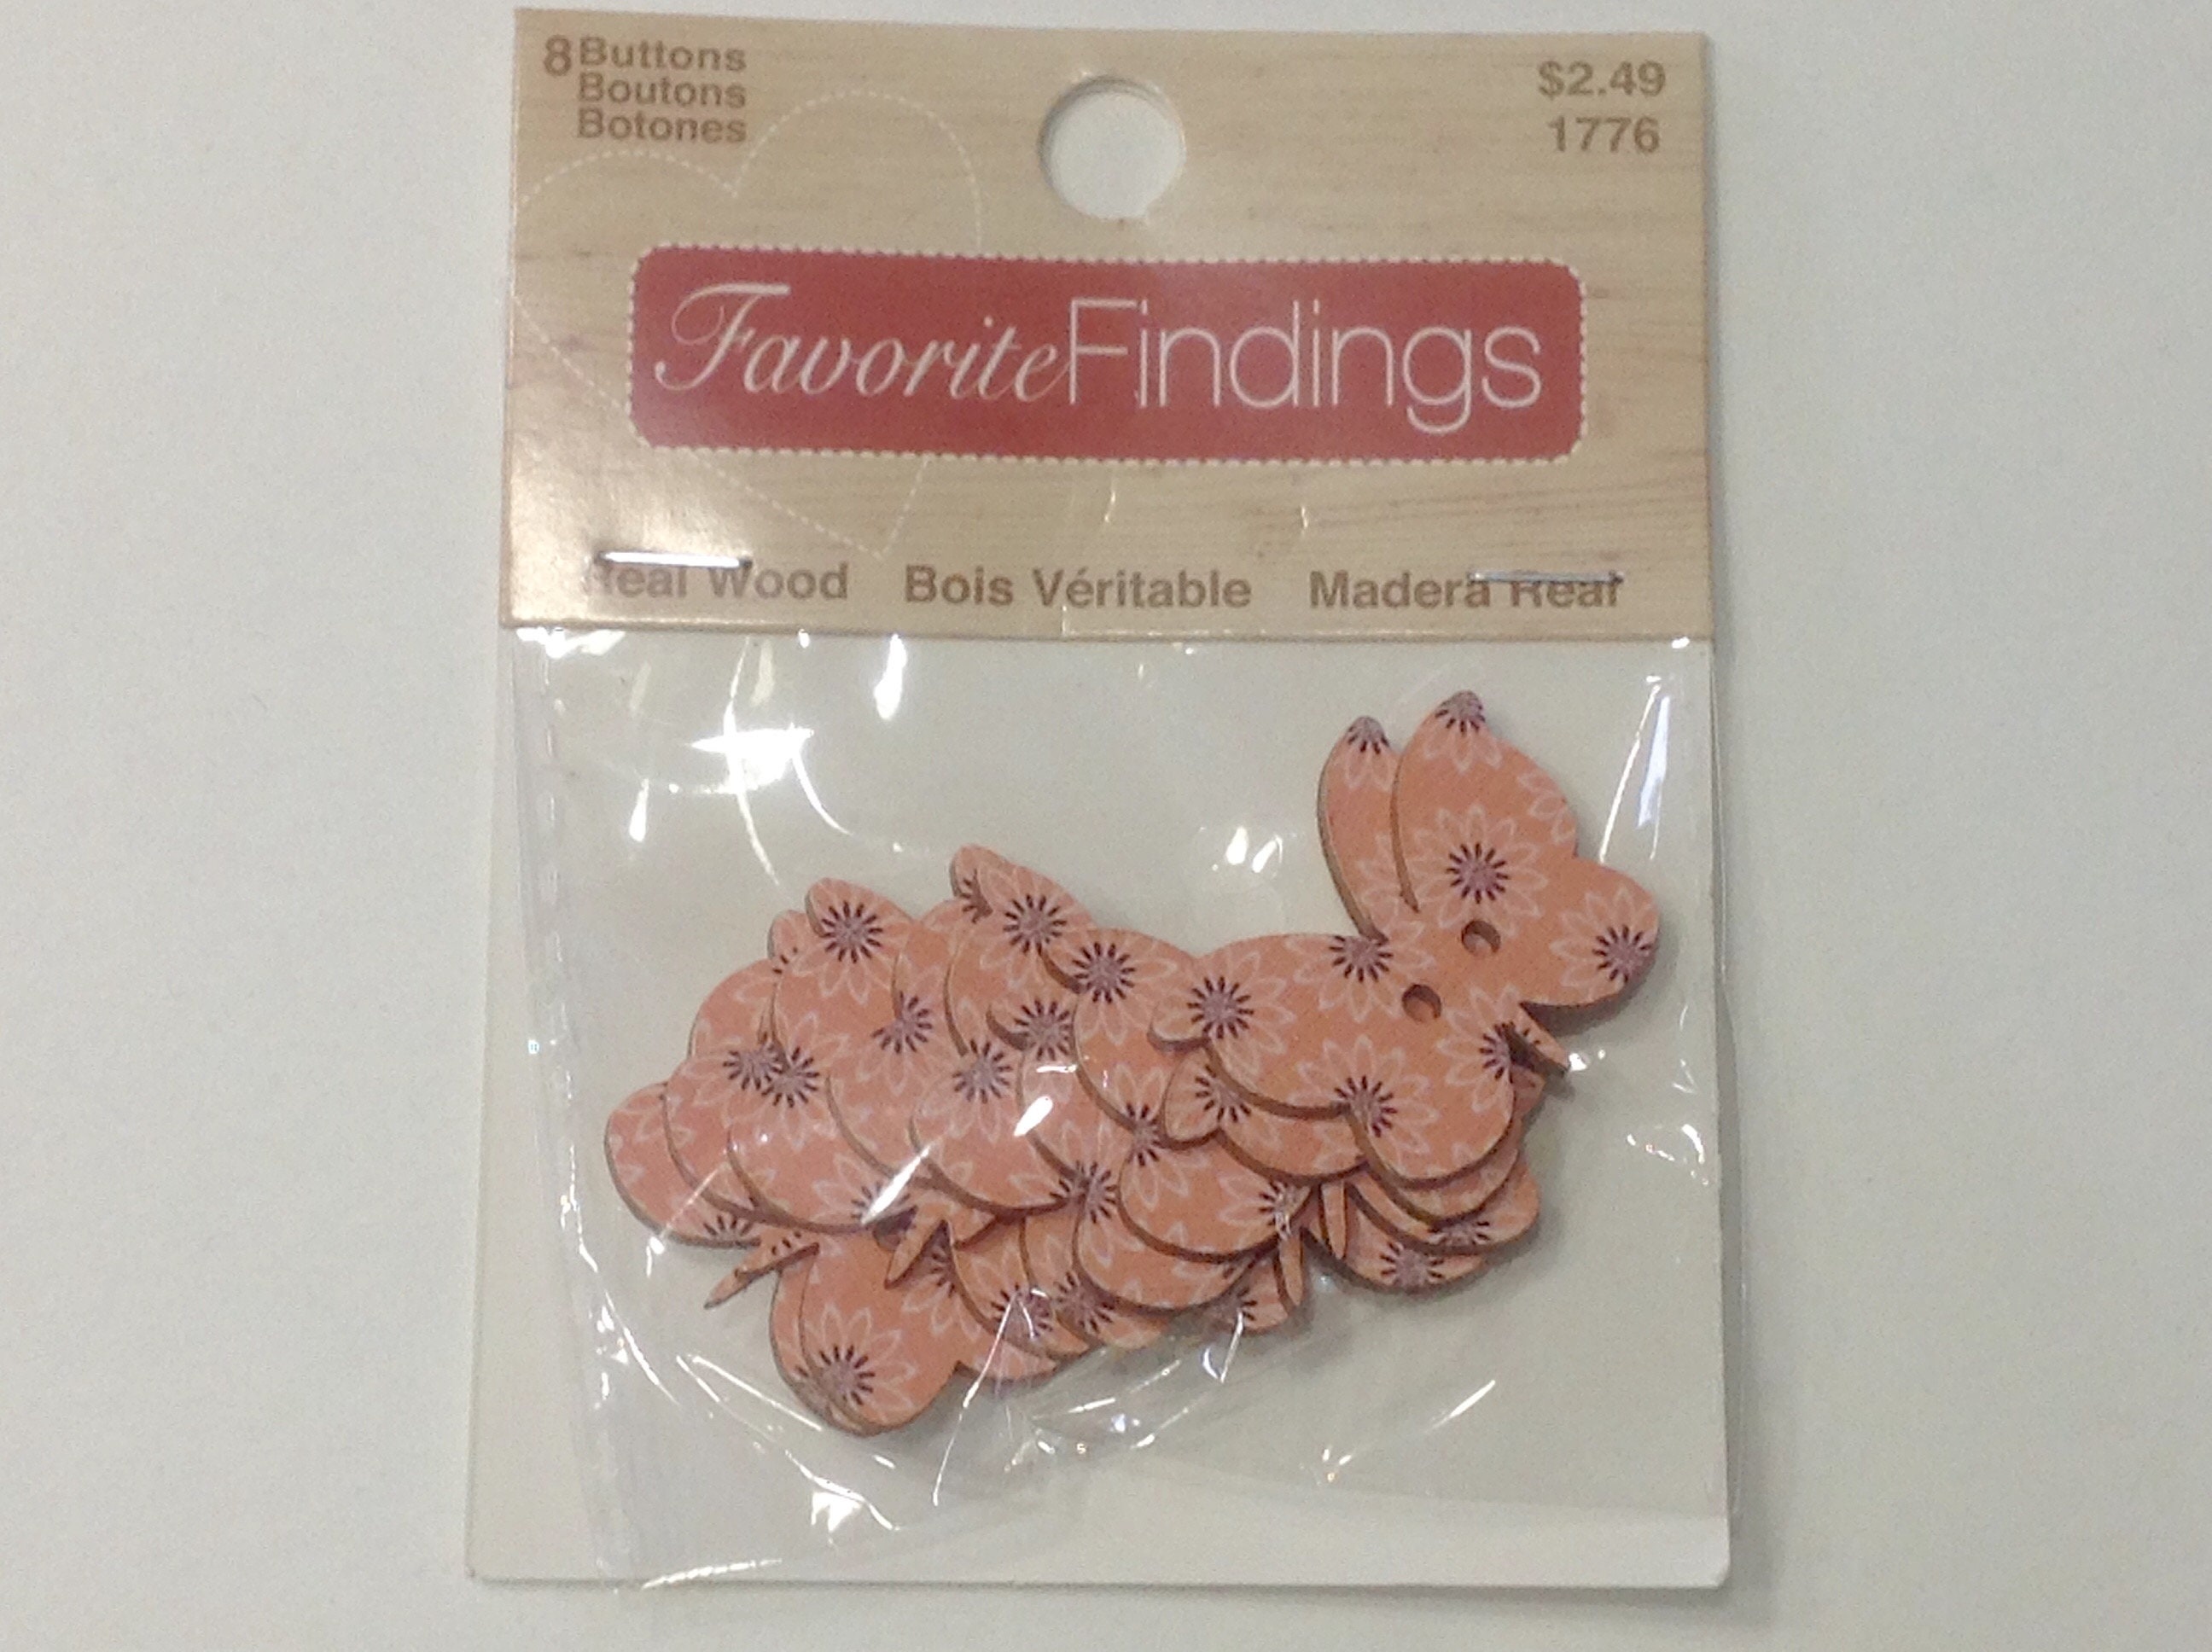 Favorite Findings Country Darks Assorted Sew Thru Buttons, 130 Pieces